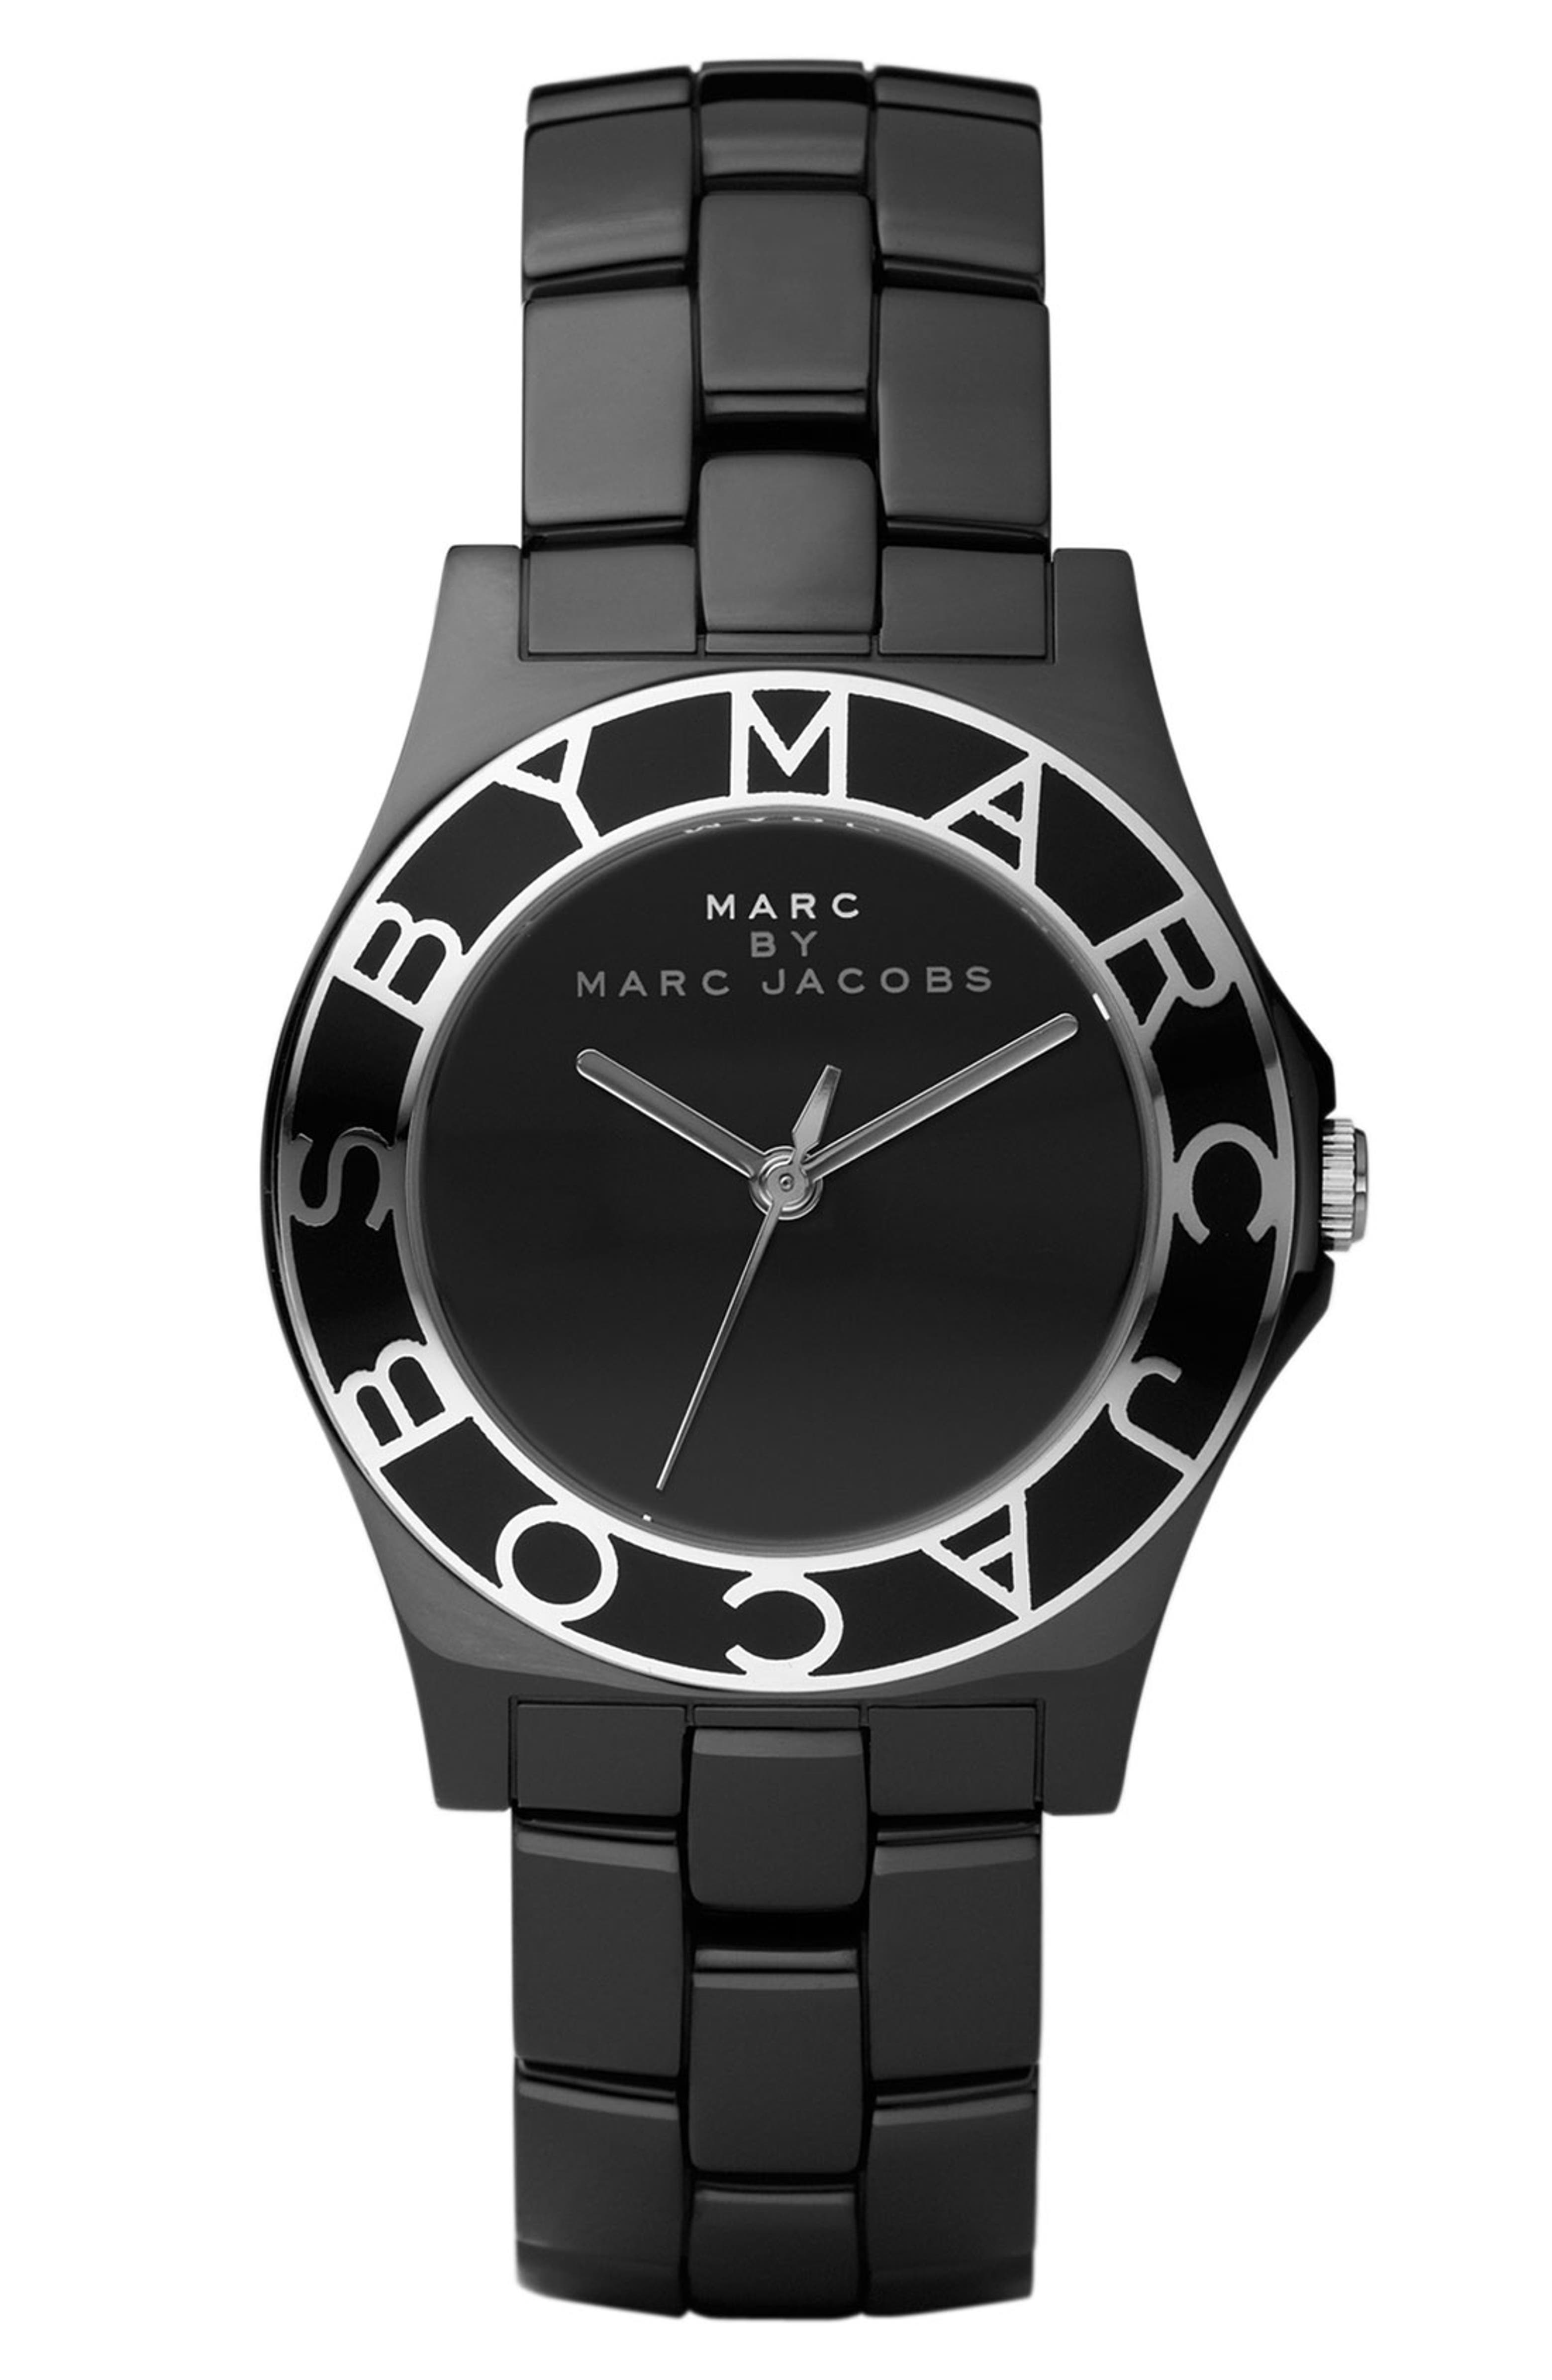 MARC BY MARC JACOBS 'Ceramic Blade' Watch | Nordstrom